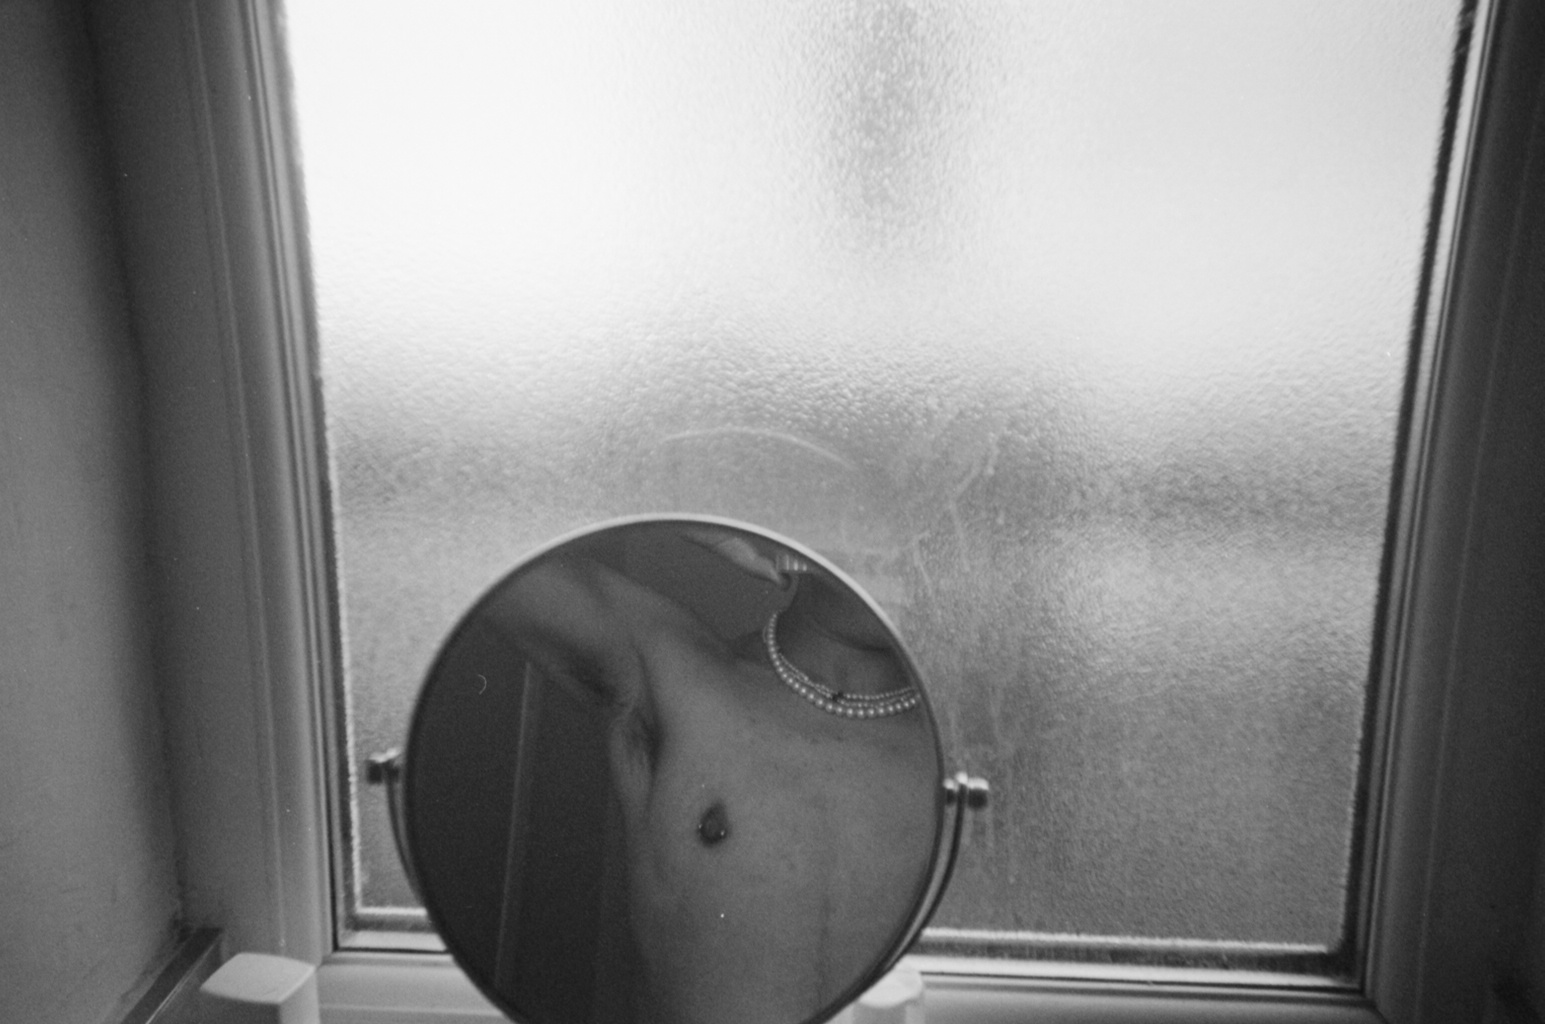 A black and white image of a small circular mirror infront of a window. The window has frosted glass, obscuring the view. In the small mirror a torso is reflected. The person wears two pearl necklaces and lifts their arms behind their head